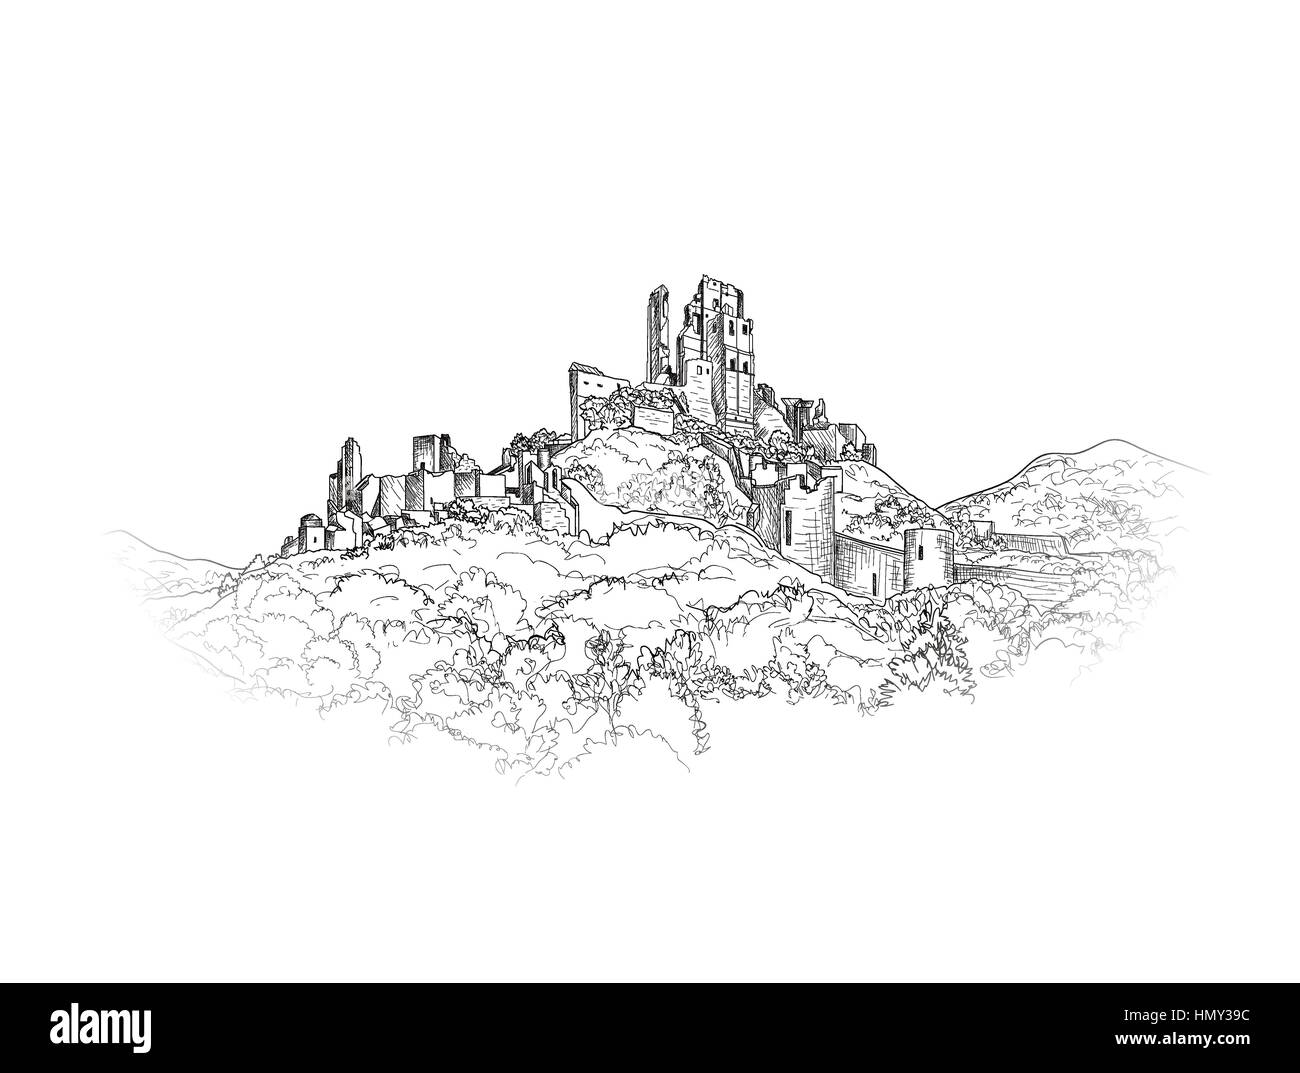 Famous Castle Landscape. Ancient Architectural Ruins Background. Castle building on the hill skyline etching. British Landmark Engraving. Hand drawn s Stock Vector